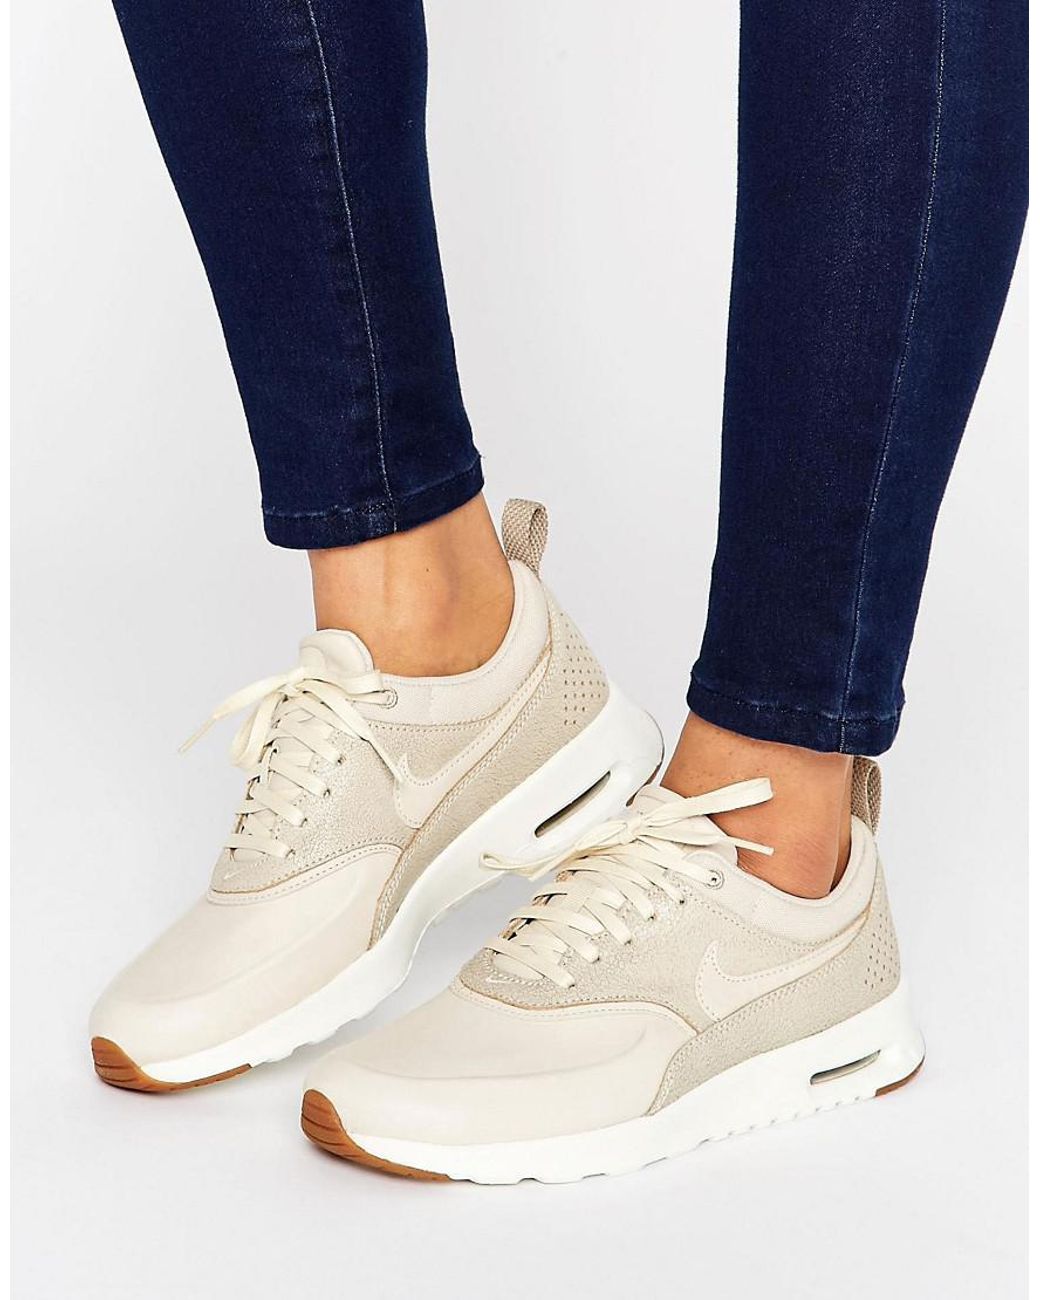 Nike Air Max Thea Basket Weave Trainers In Oatmeal in Natural | Lyst UK